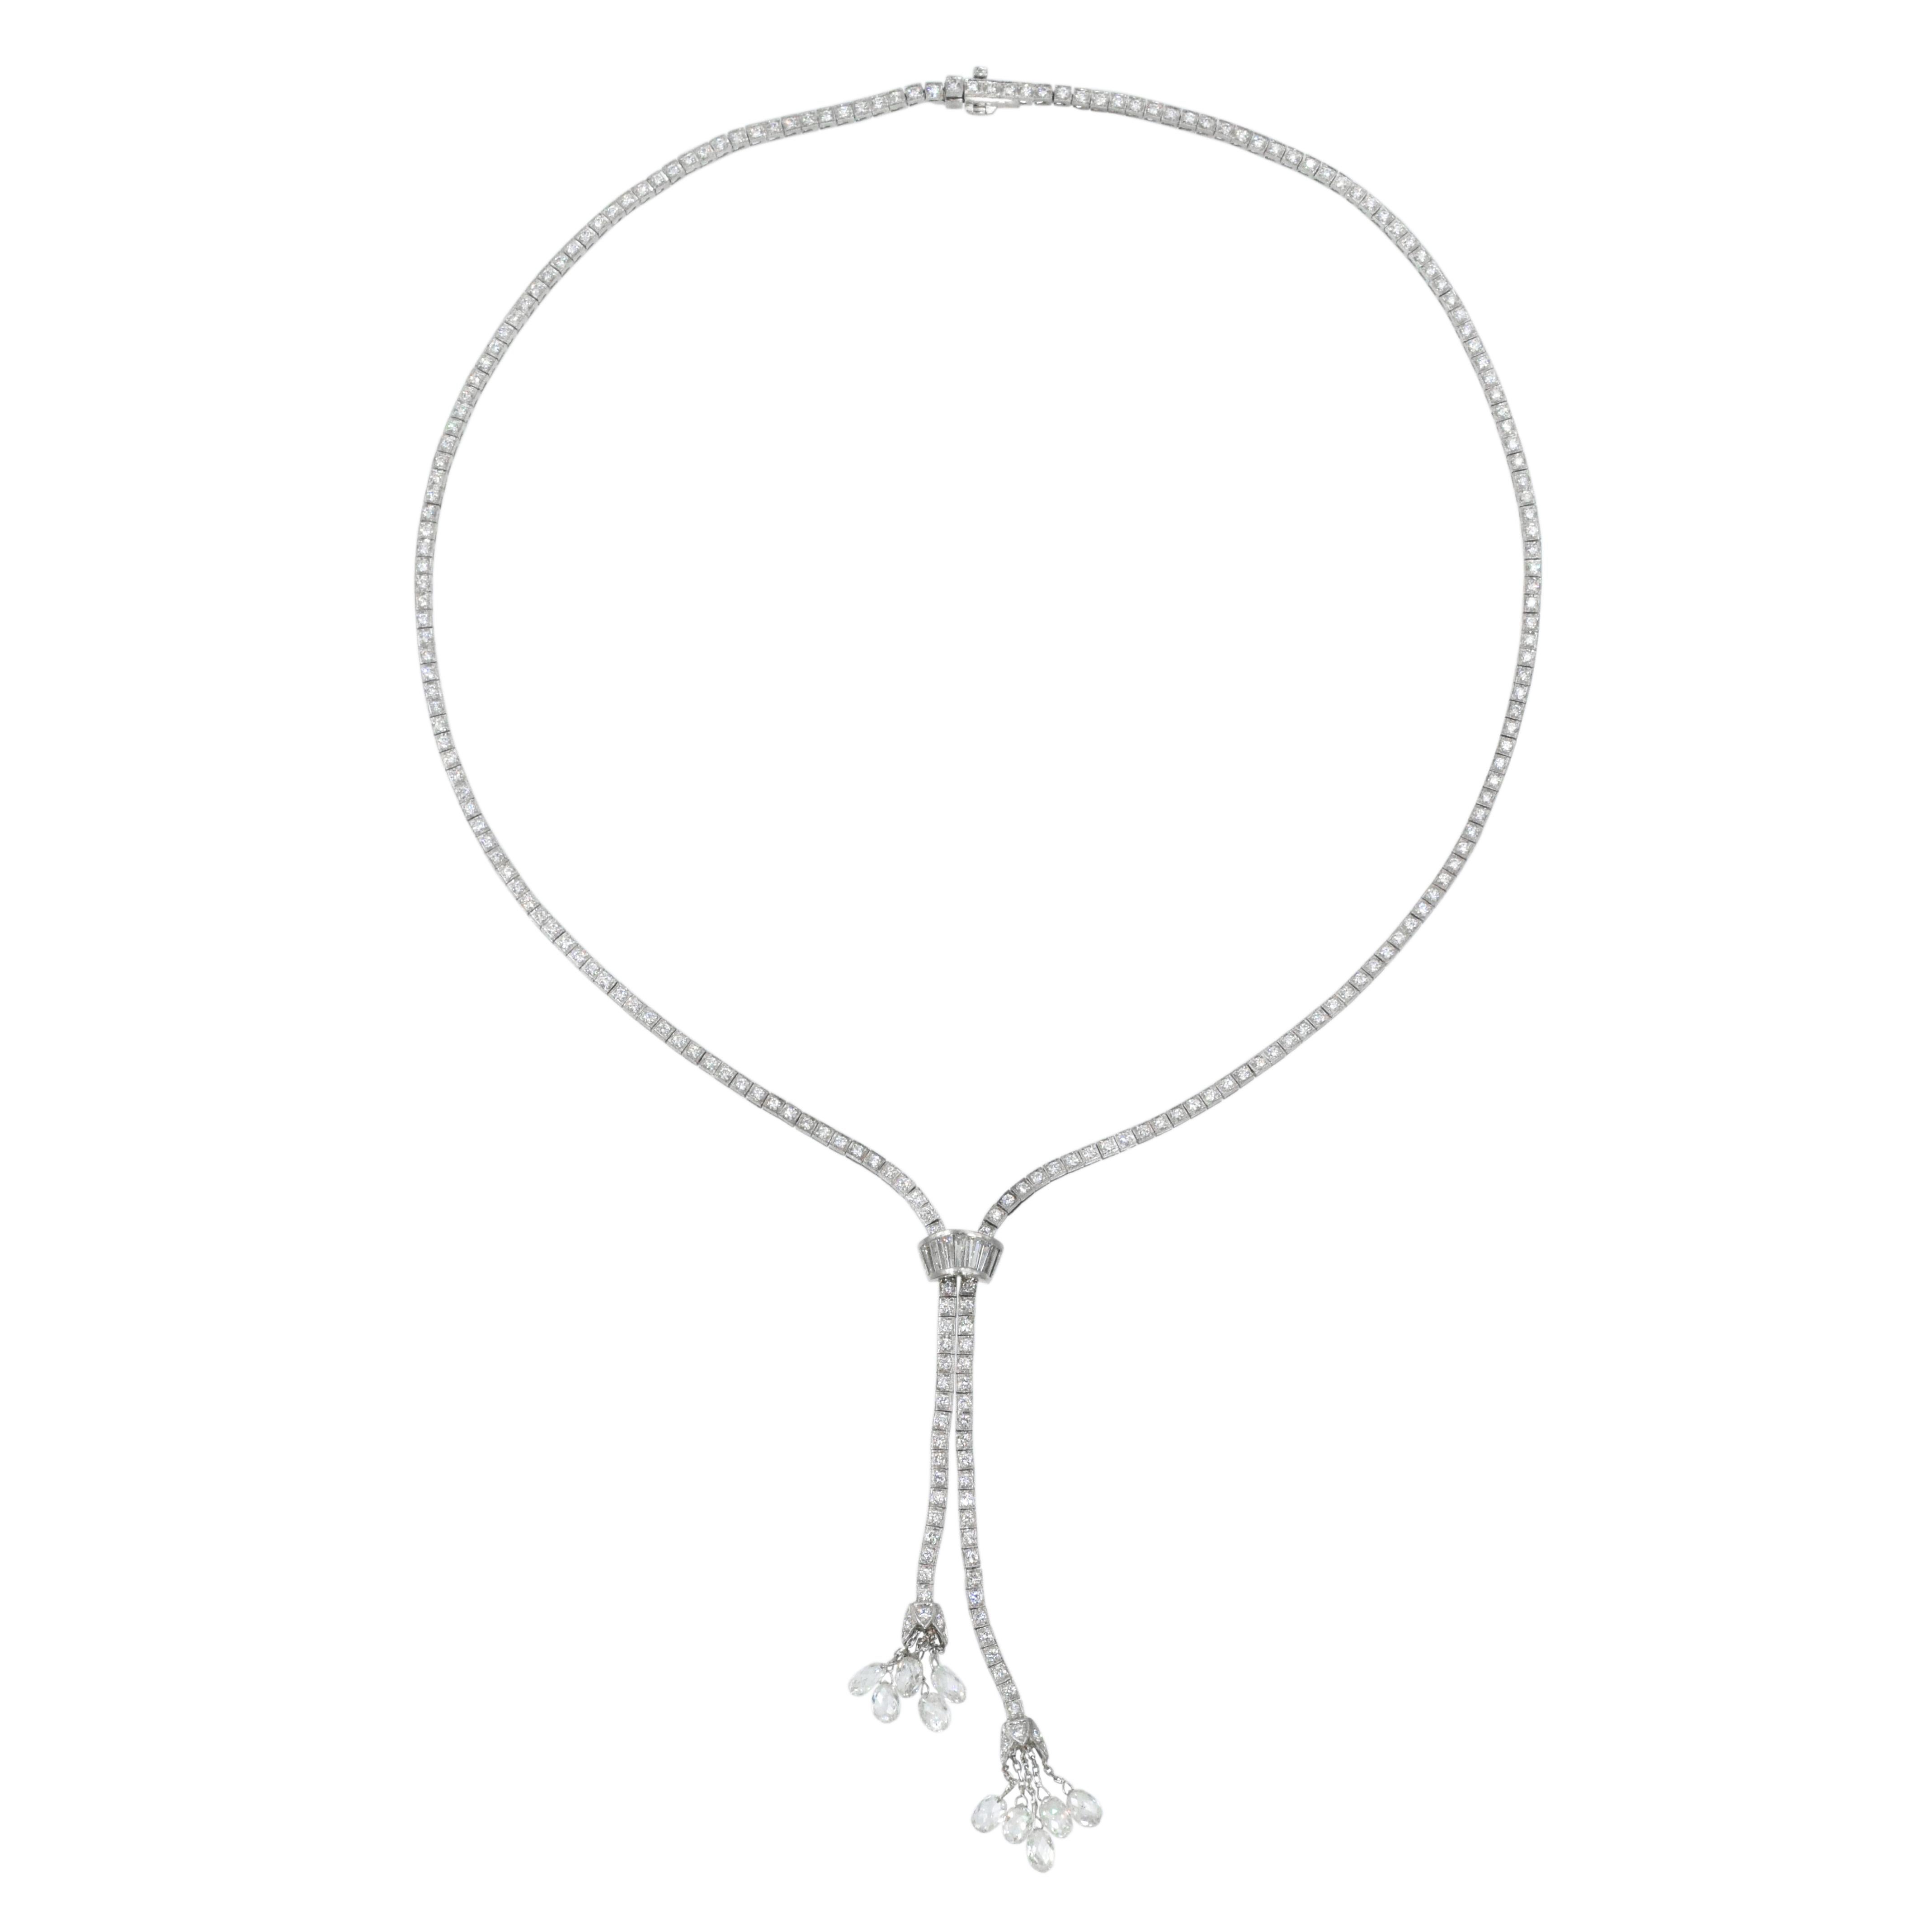 Simple & Elegant!

Beautiful diamond necklace. Two ends connected together with channel set baguette shape diamond band and  hanging tassel with 10 briolettes.

Estimated total weight of the diamonds is 10.30 carats
Length: 10 inches
Platinum